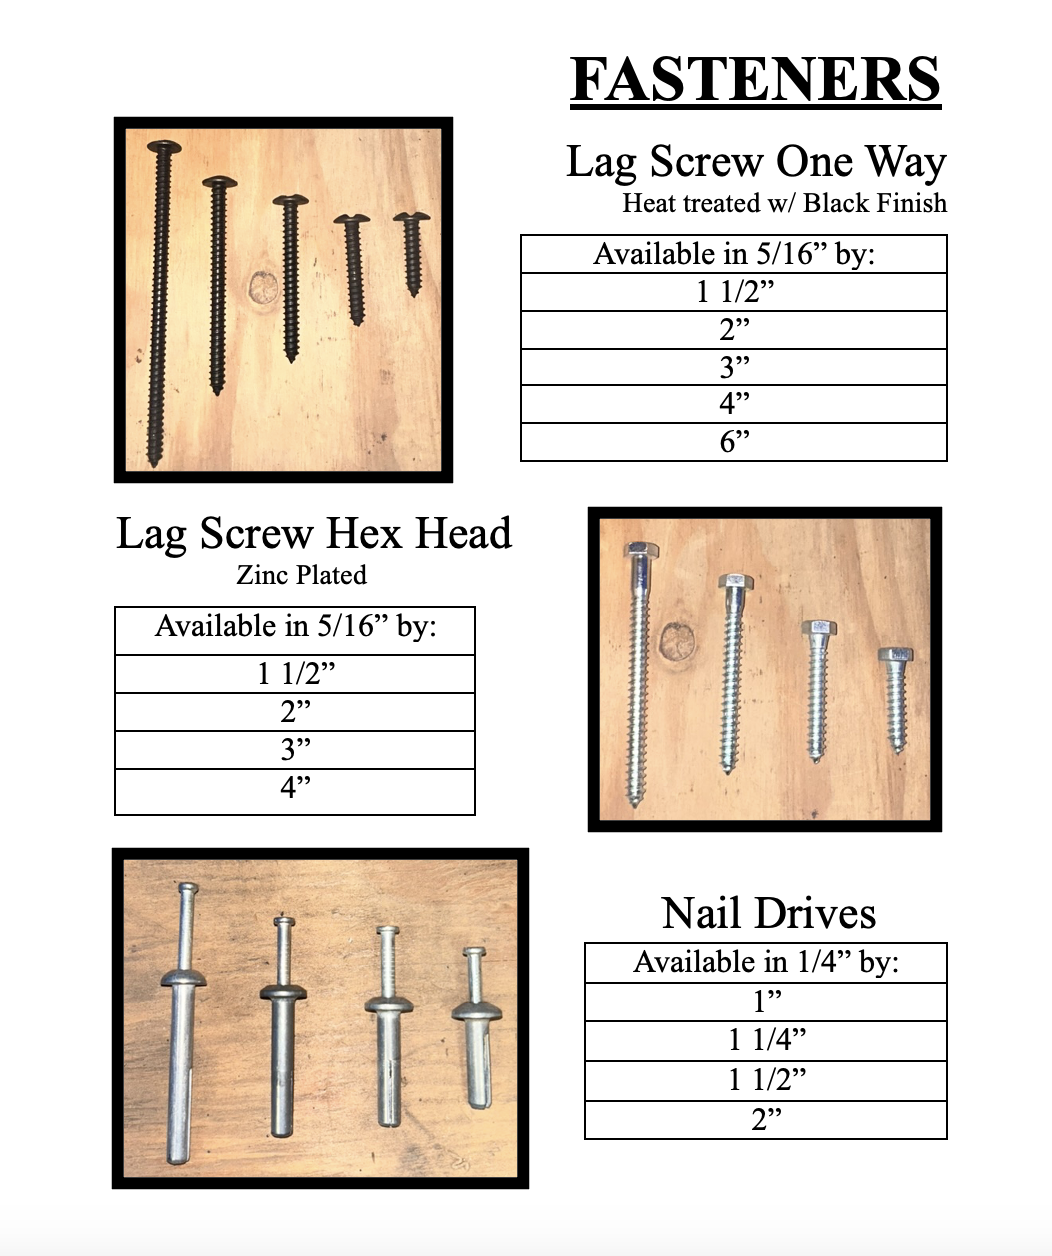 One ways, Hex heads, nail drives